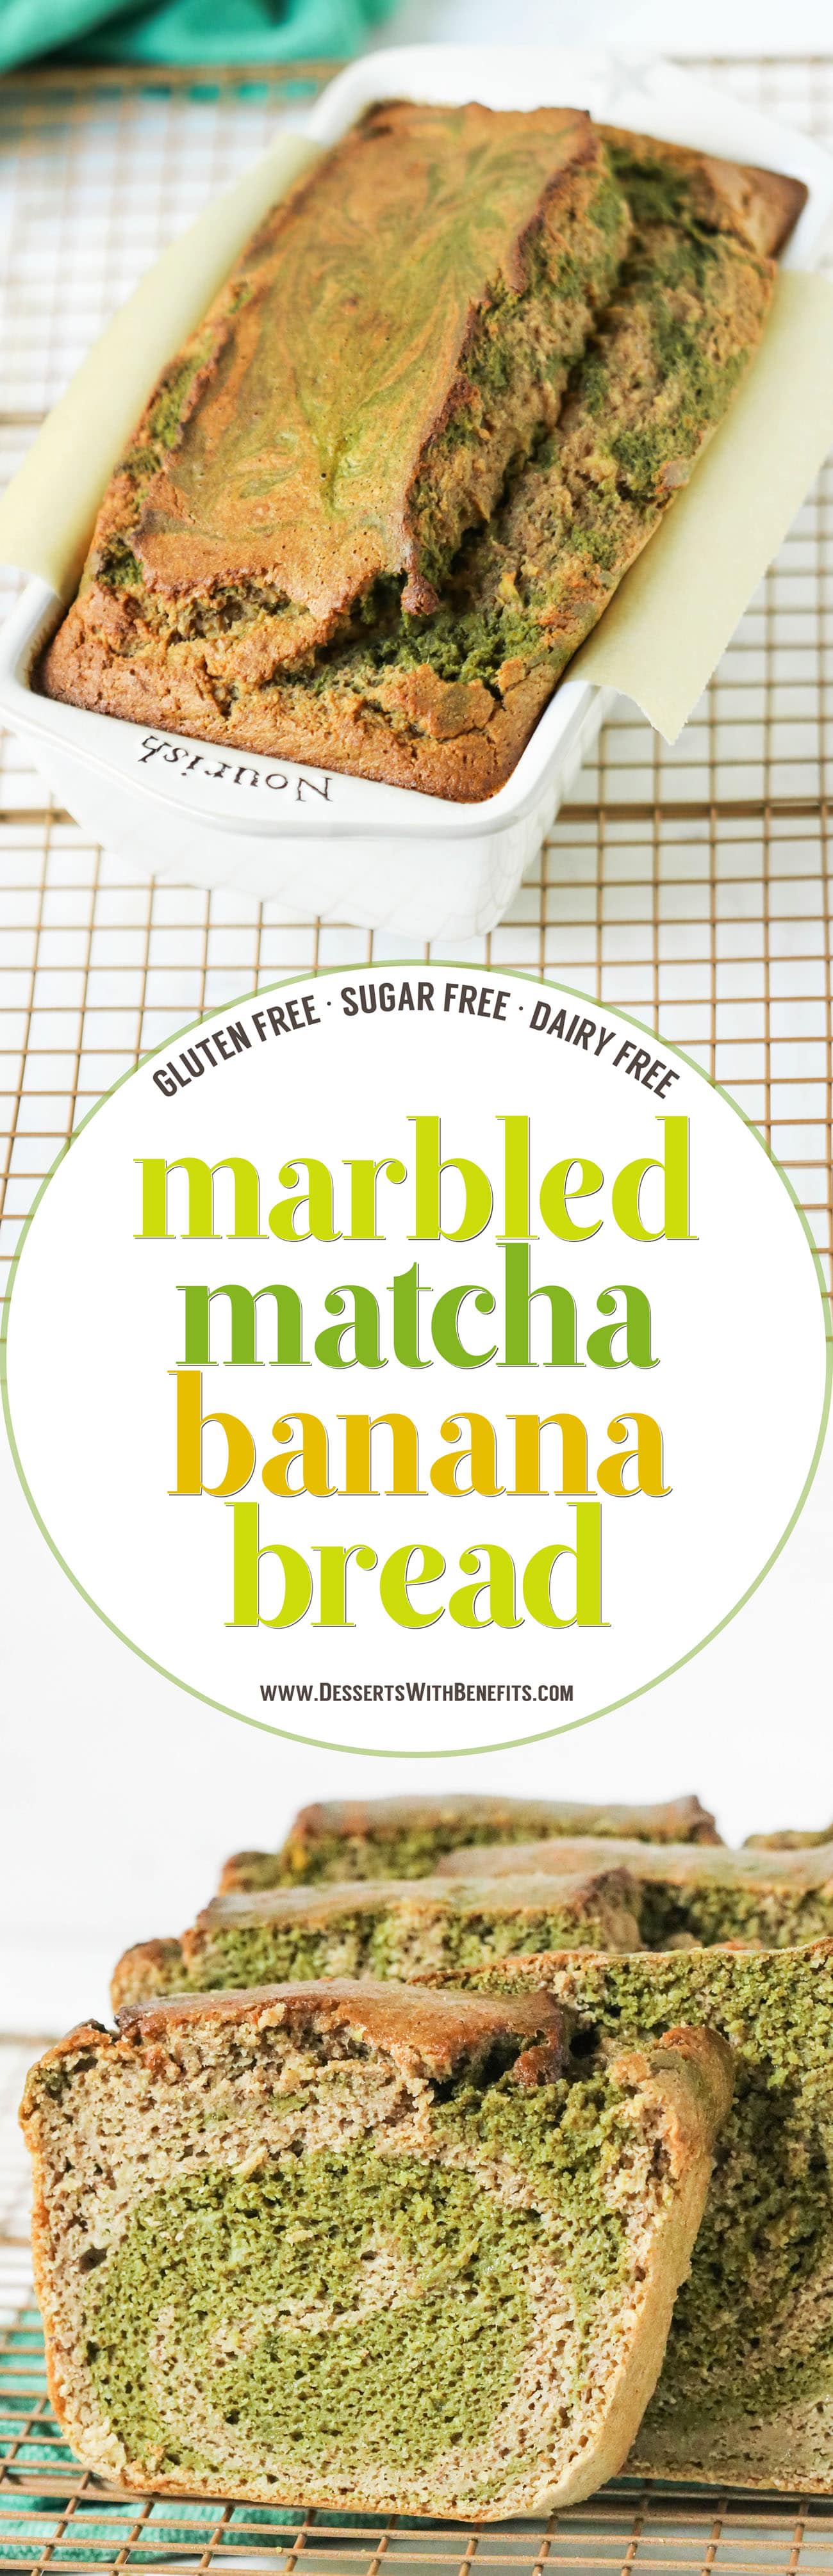 This Marbled Matcha Green Tea Banana Bread is so moist, fluffy, springy, and flavorful, you'd never know it's gluten free, dairy free, sugar free, and high protein!